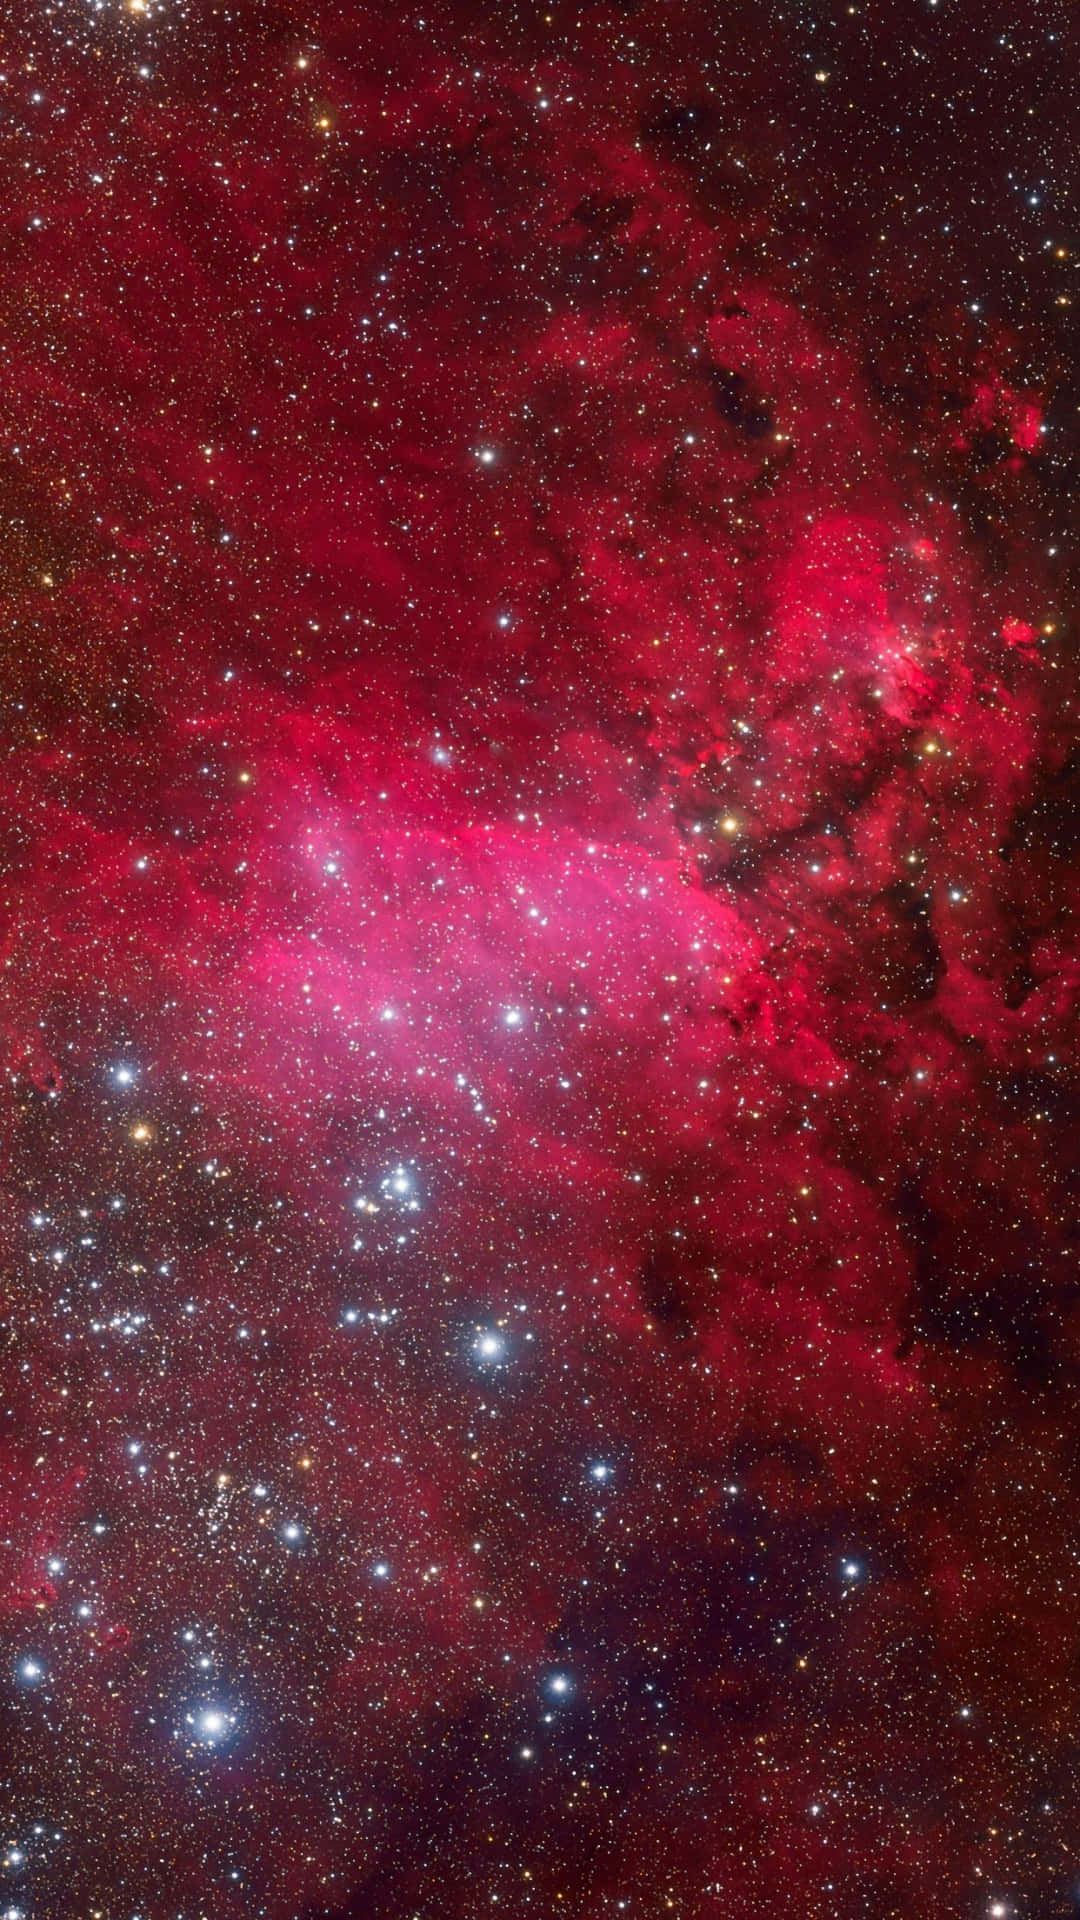 Shining Red Galaxy in Space